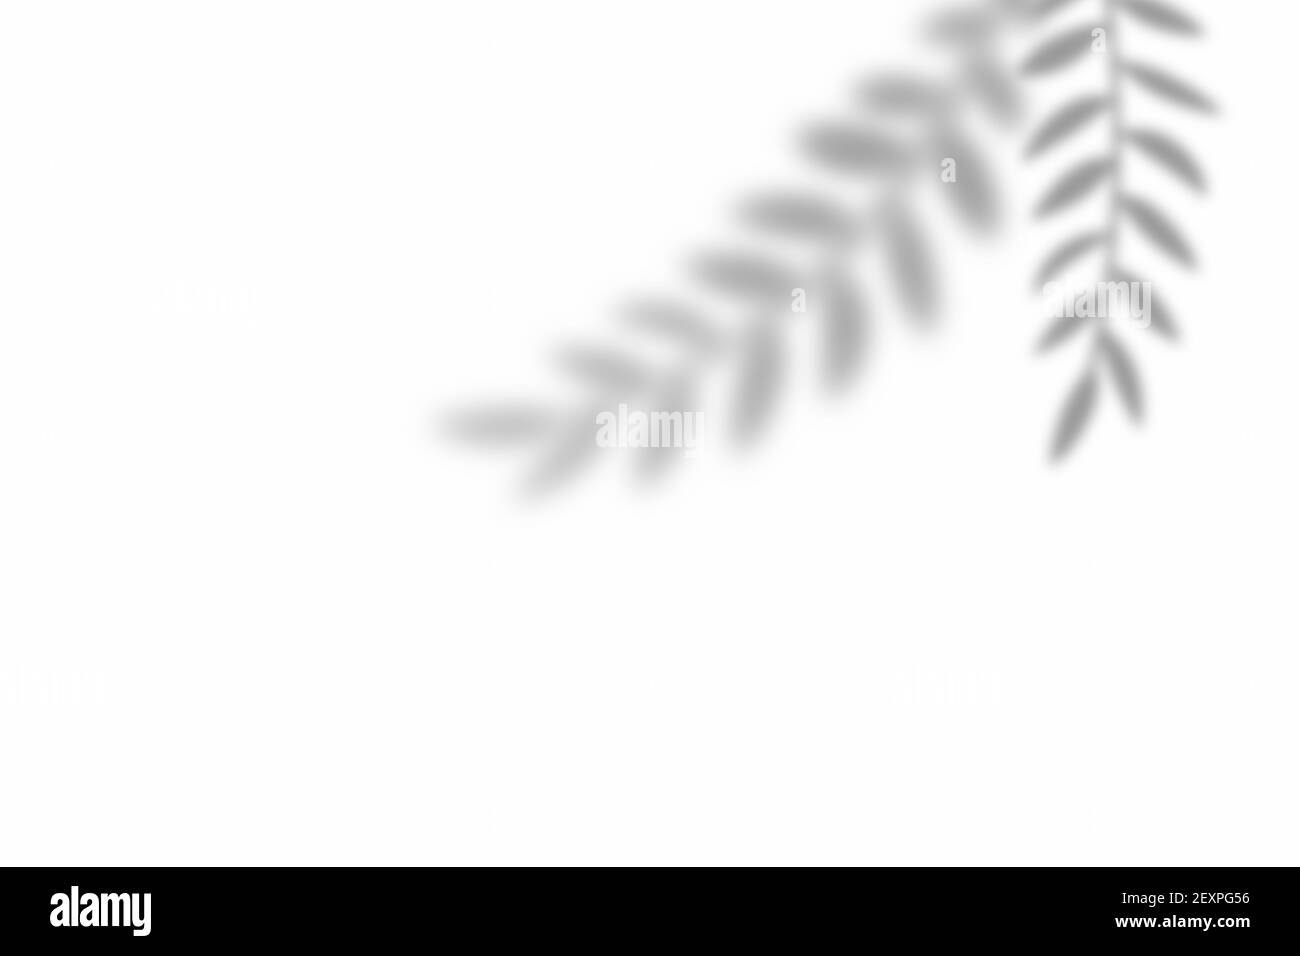 Shadow of leaf overlay on white texture background. Use for decorative product presentation. Stock Photo